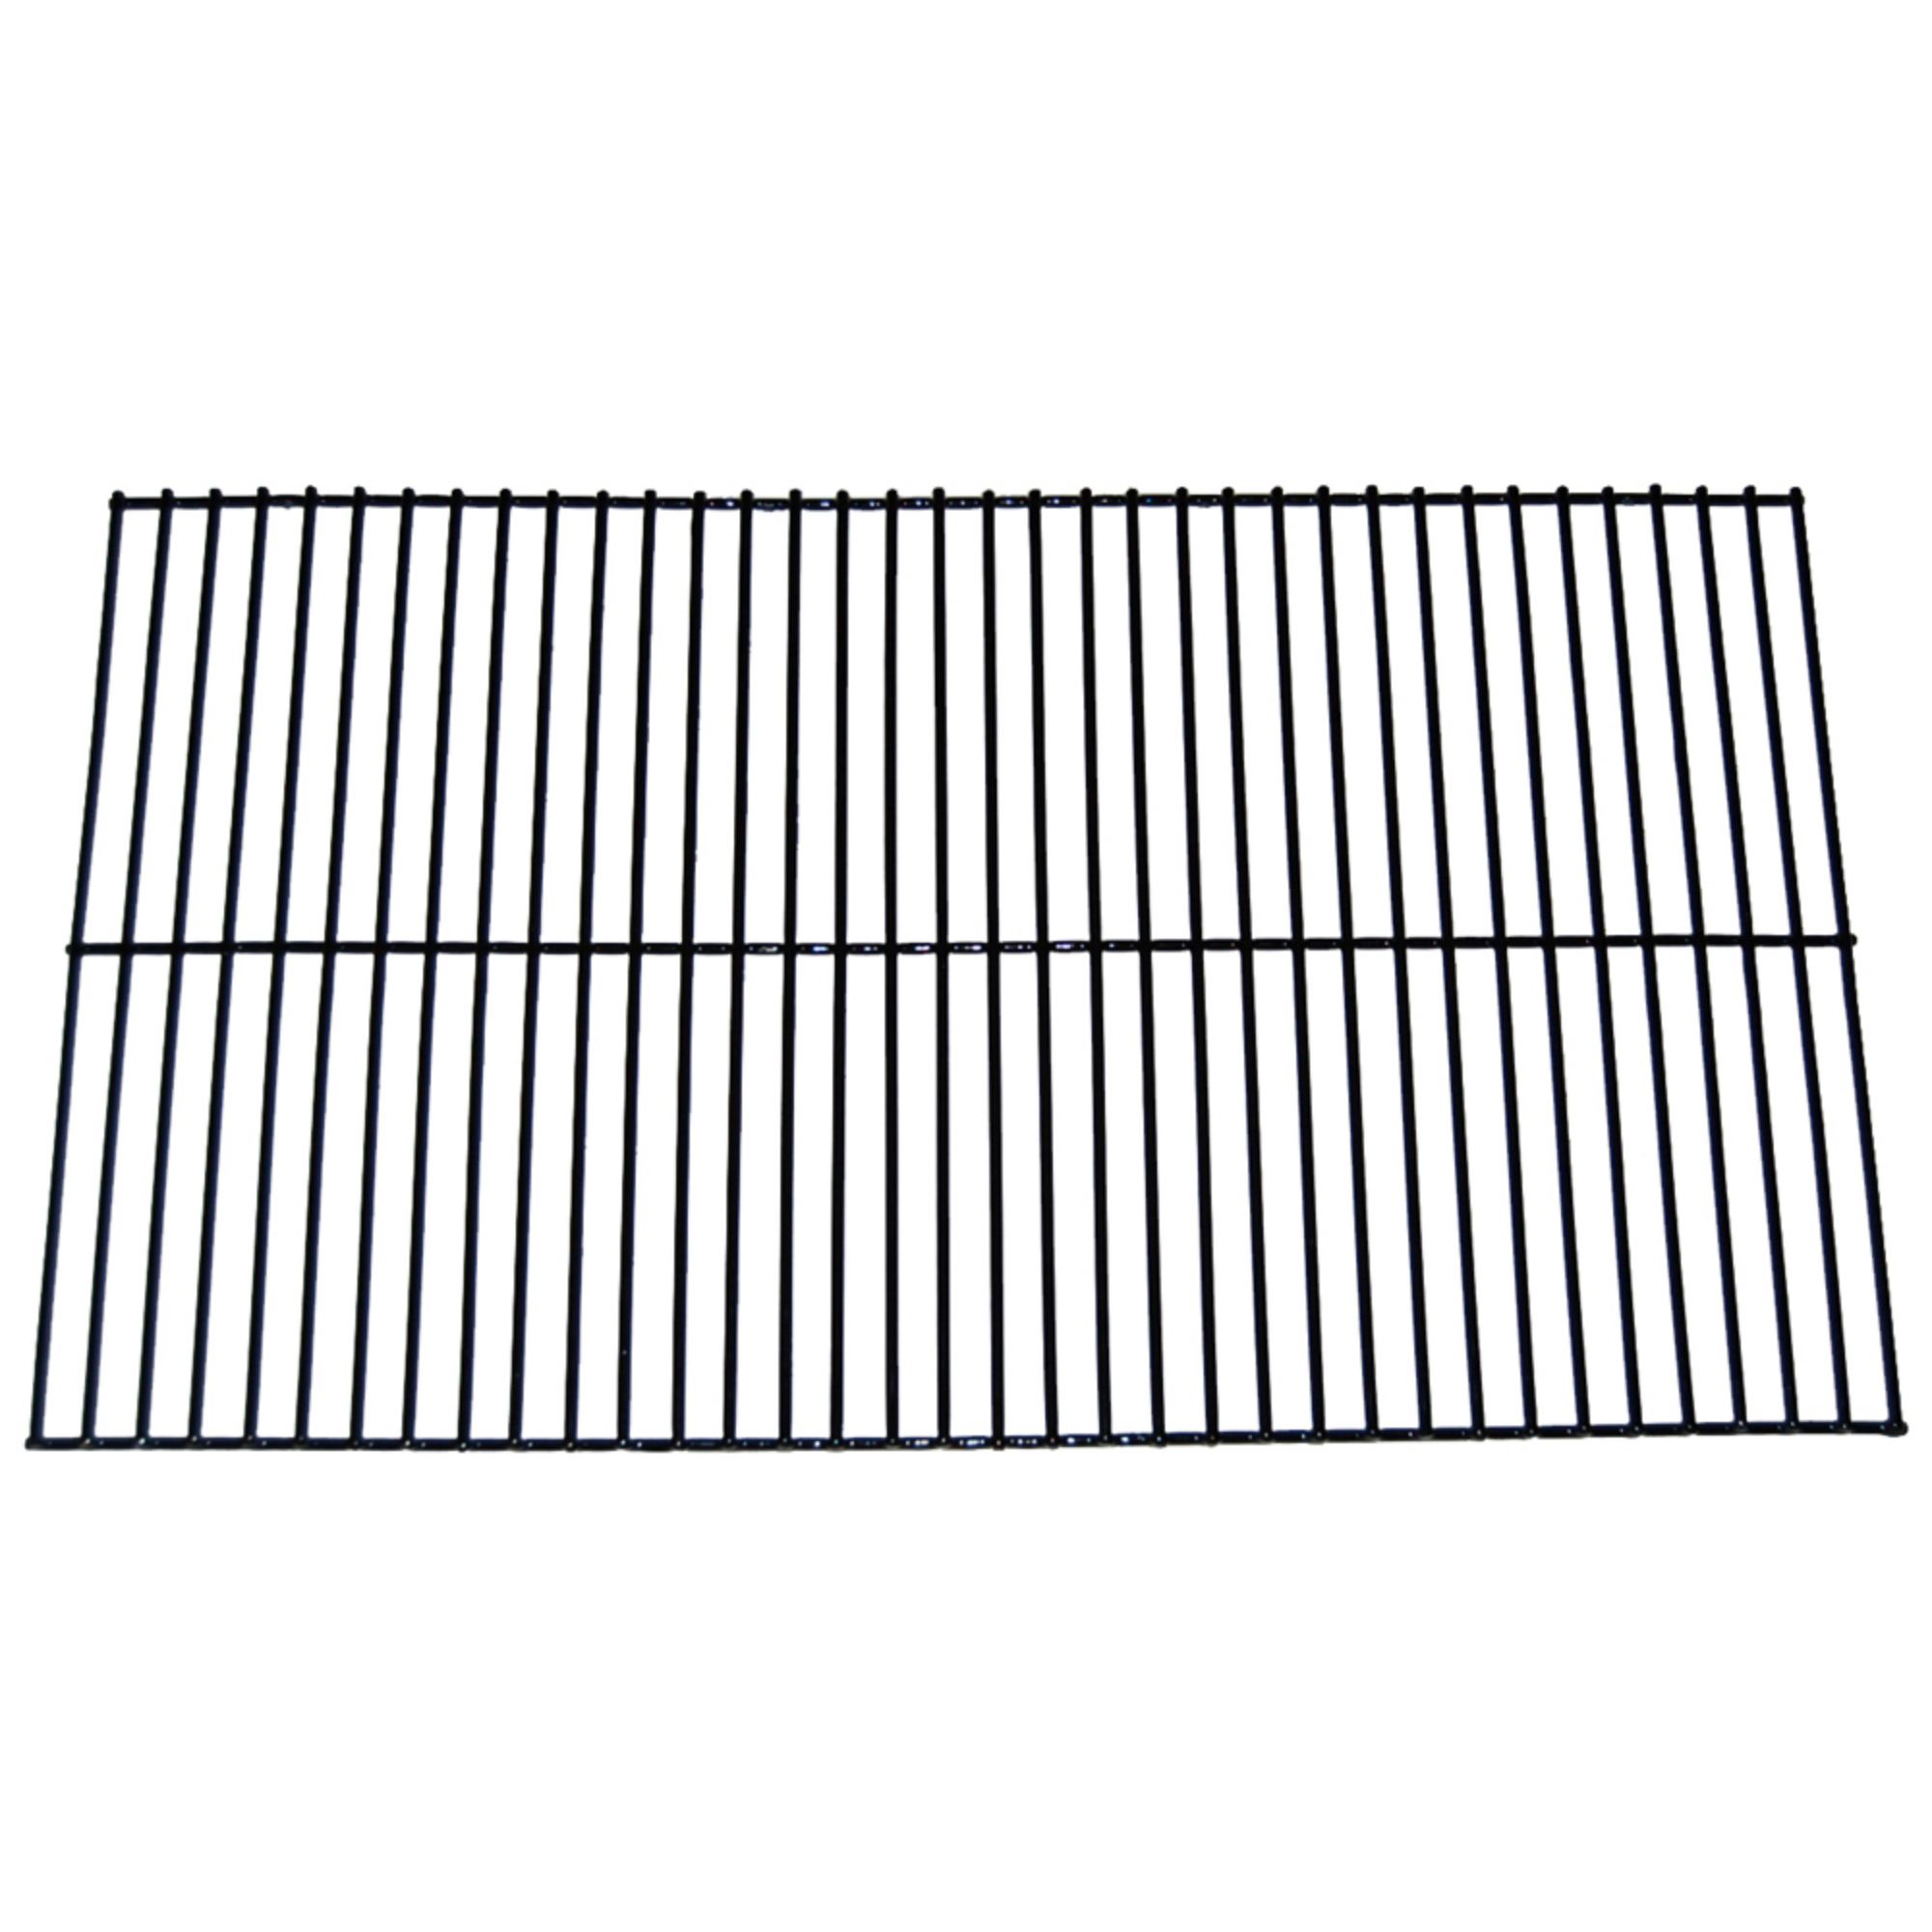 Porcelain Steel Wire Cooking Grid for Charbroil, Kenmore, Thermos Brand Gas Grills